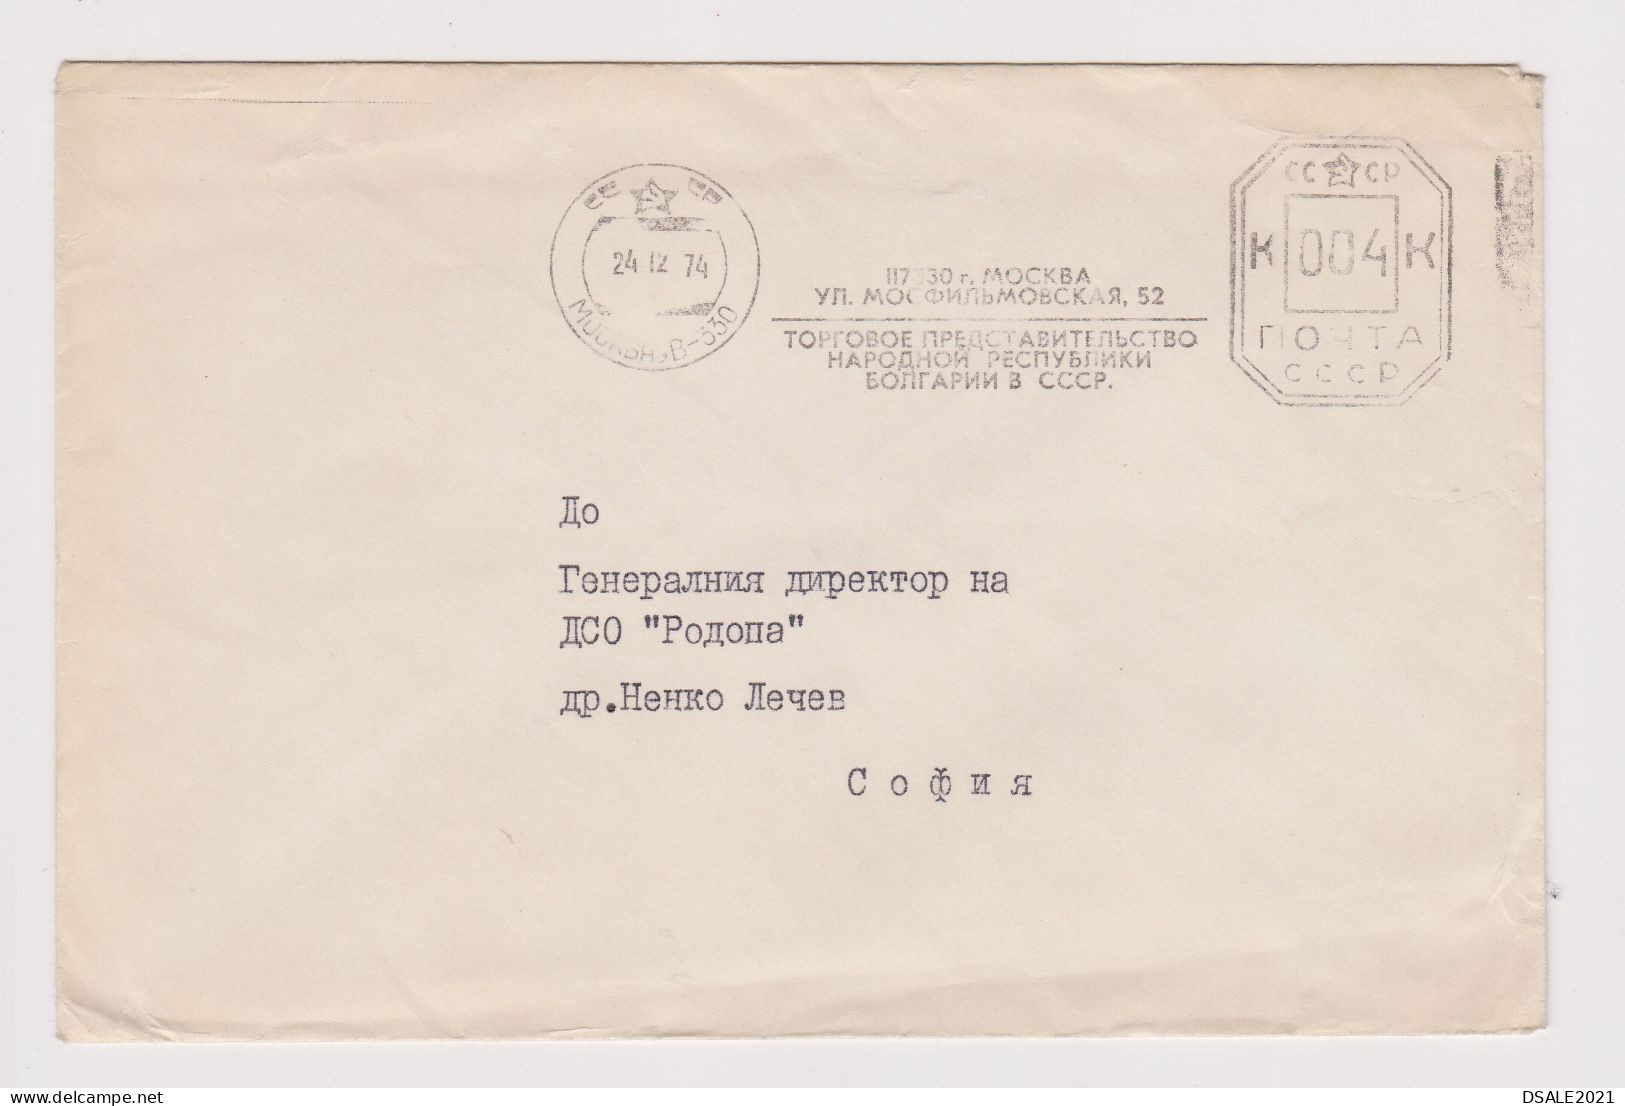 Russia USSR Soviet Union 1974 Cover Machine EMA METER Stamp Cachet (Bulgarian Commercial Representation In USSR) /66170 - Franking Machines (EMA)